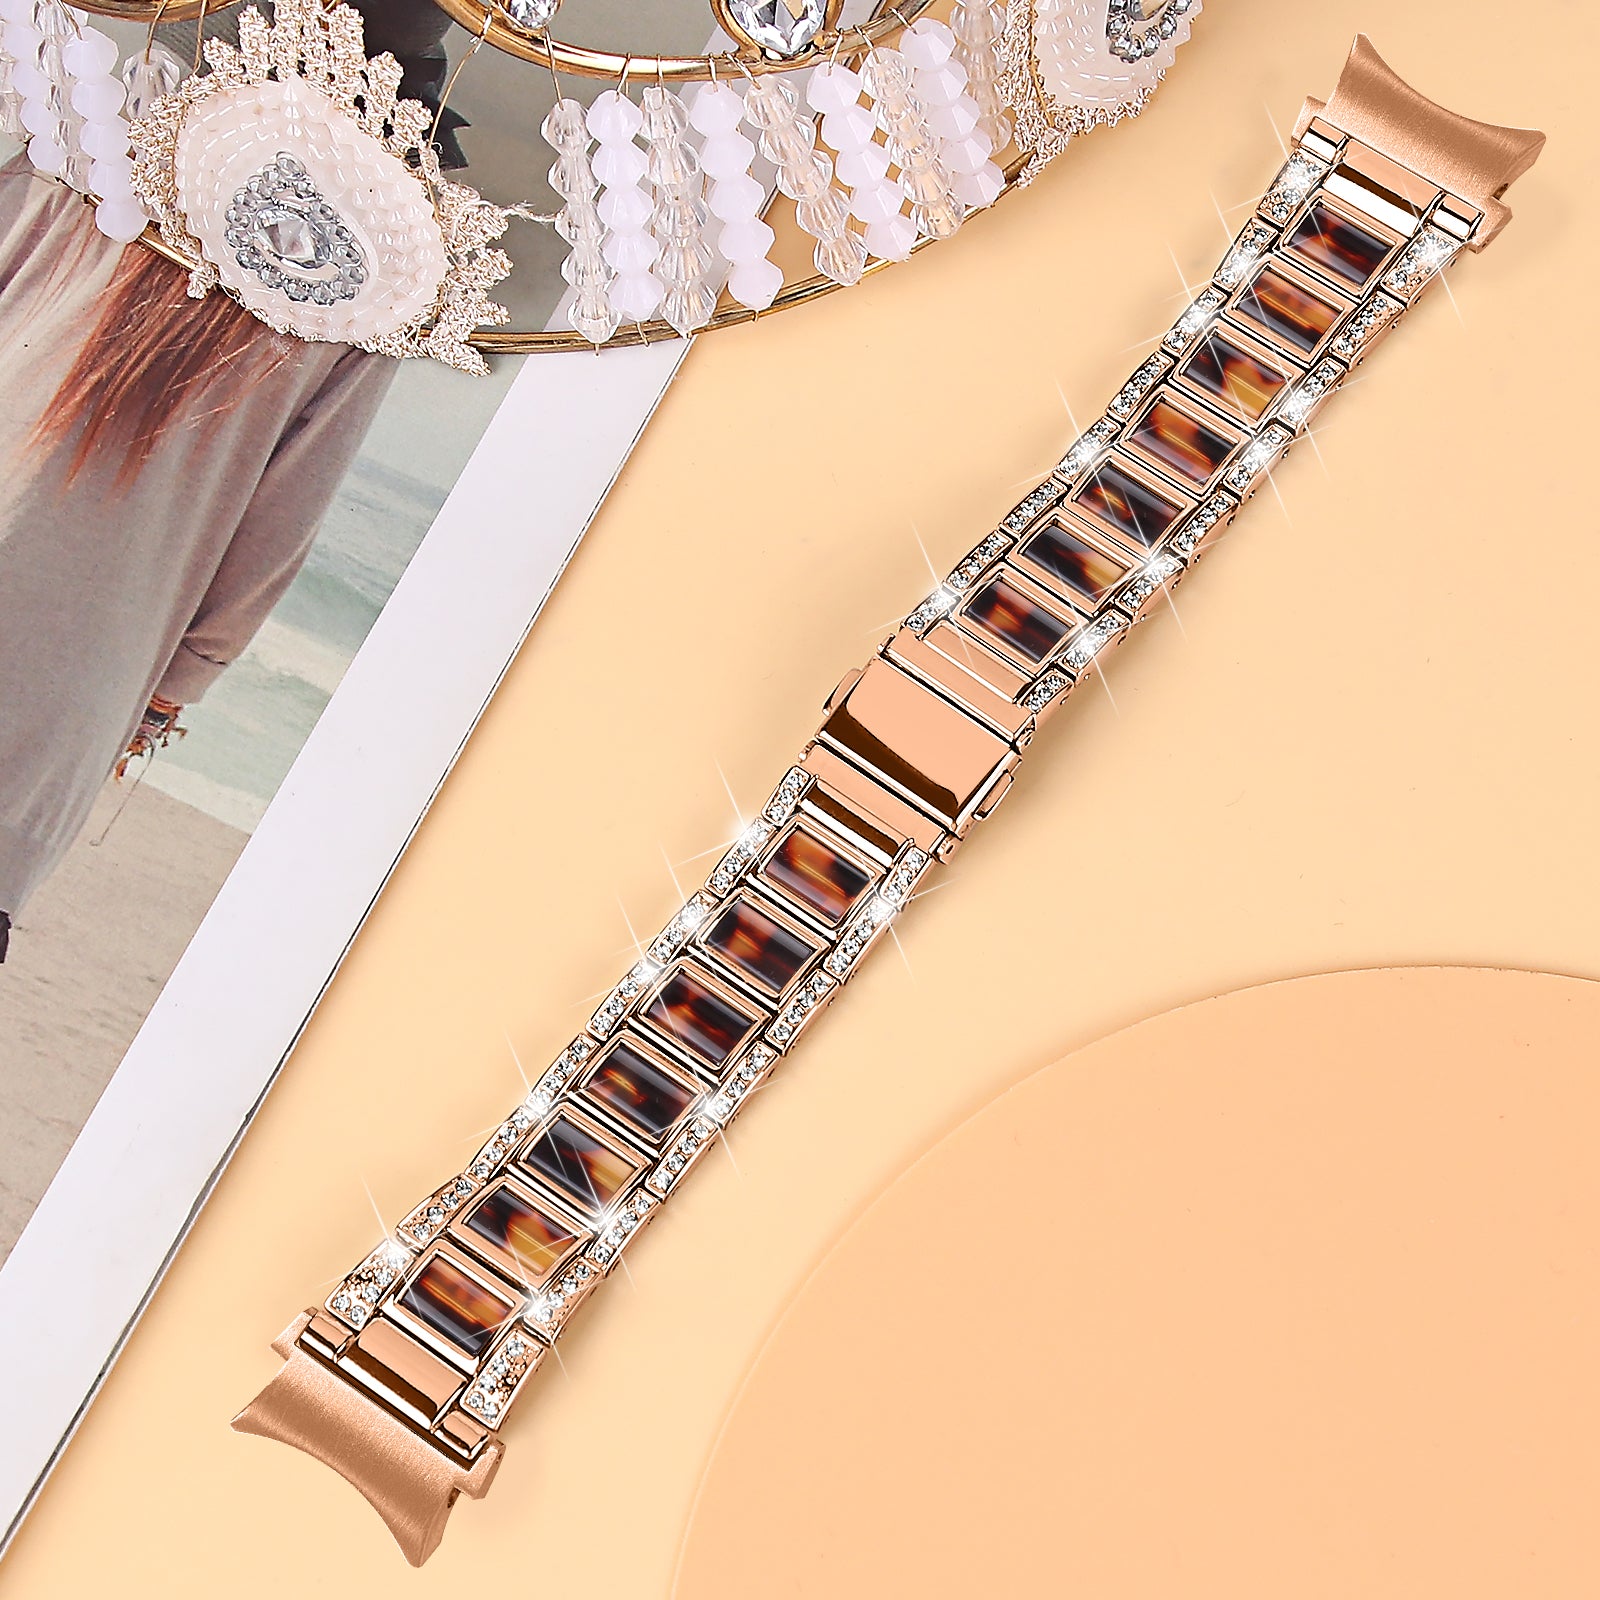 for Samsung Galaxy Watch4 Active 40mm/44mm/Watch4 Classic 42mm/46mm Rhinestone Decor Stainless Steel Resin Watch Band with Watch Strap Adapter - Rose Gold/White